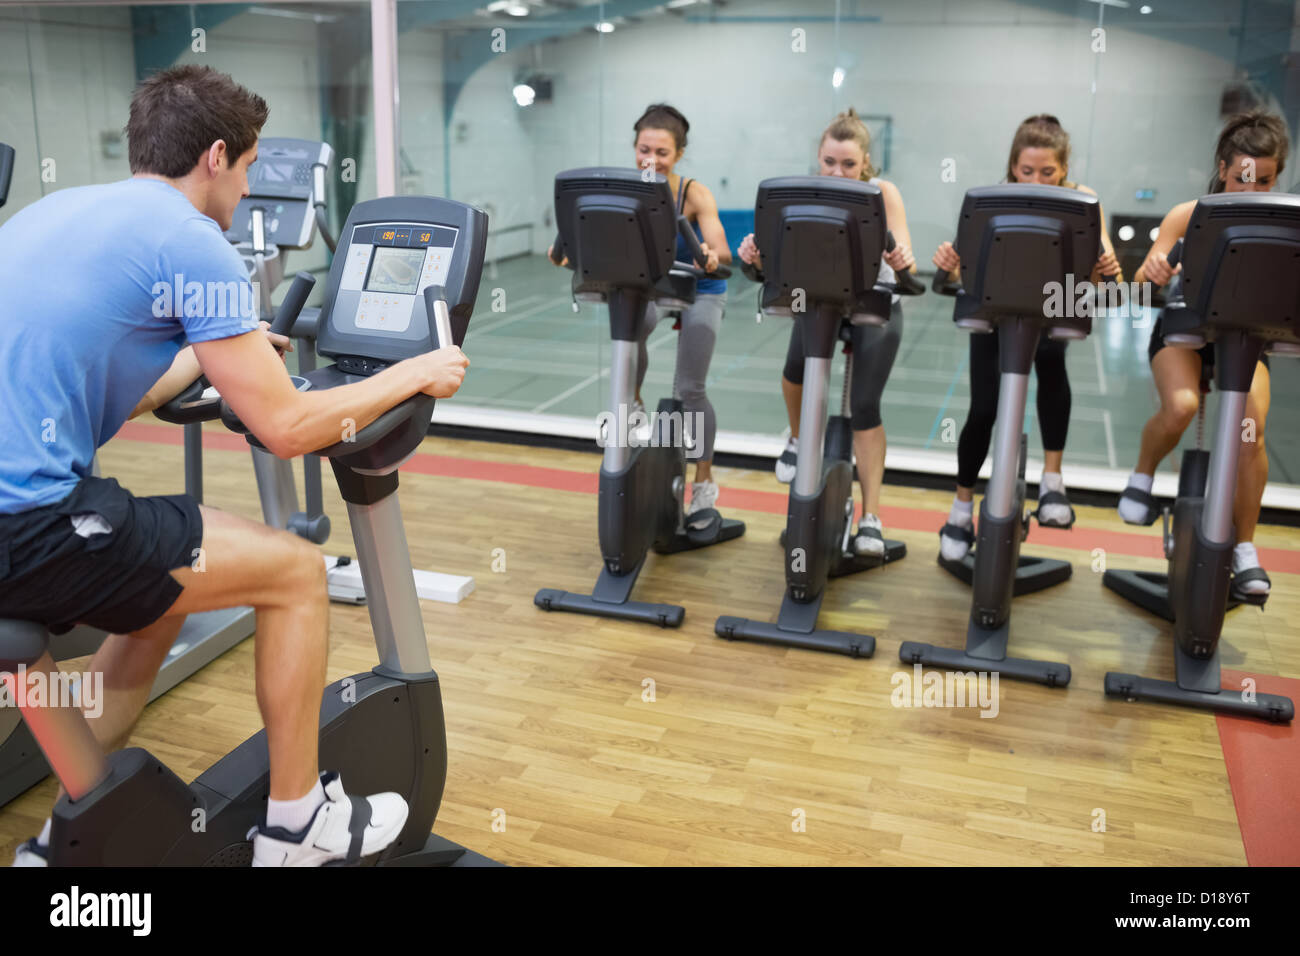 Male instructor teaches spinning class Stock Photo - Alamy